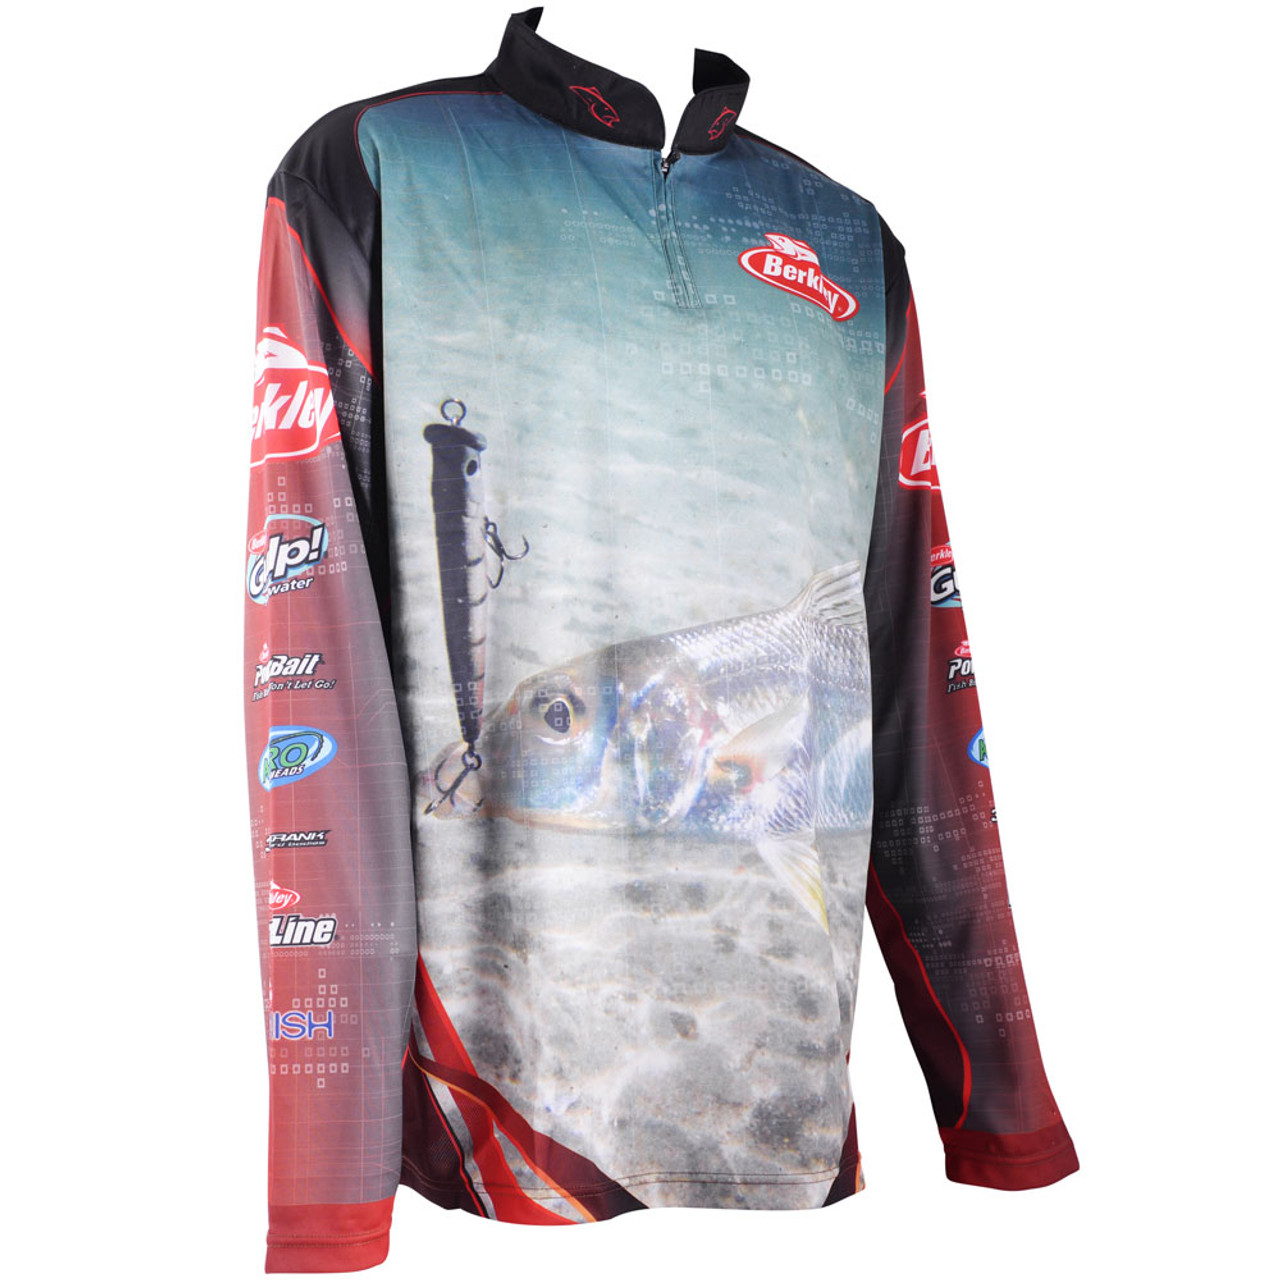 Buy Outlet Berkley Fishing Apparel - Shirts online - reduction in price